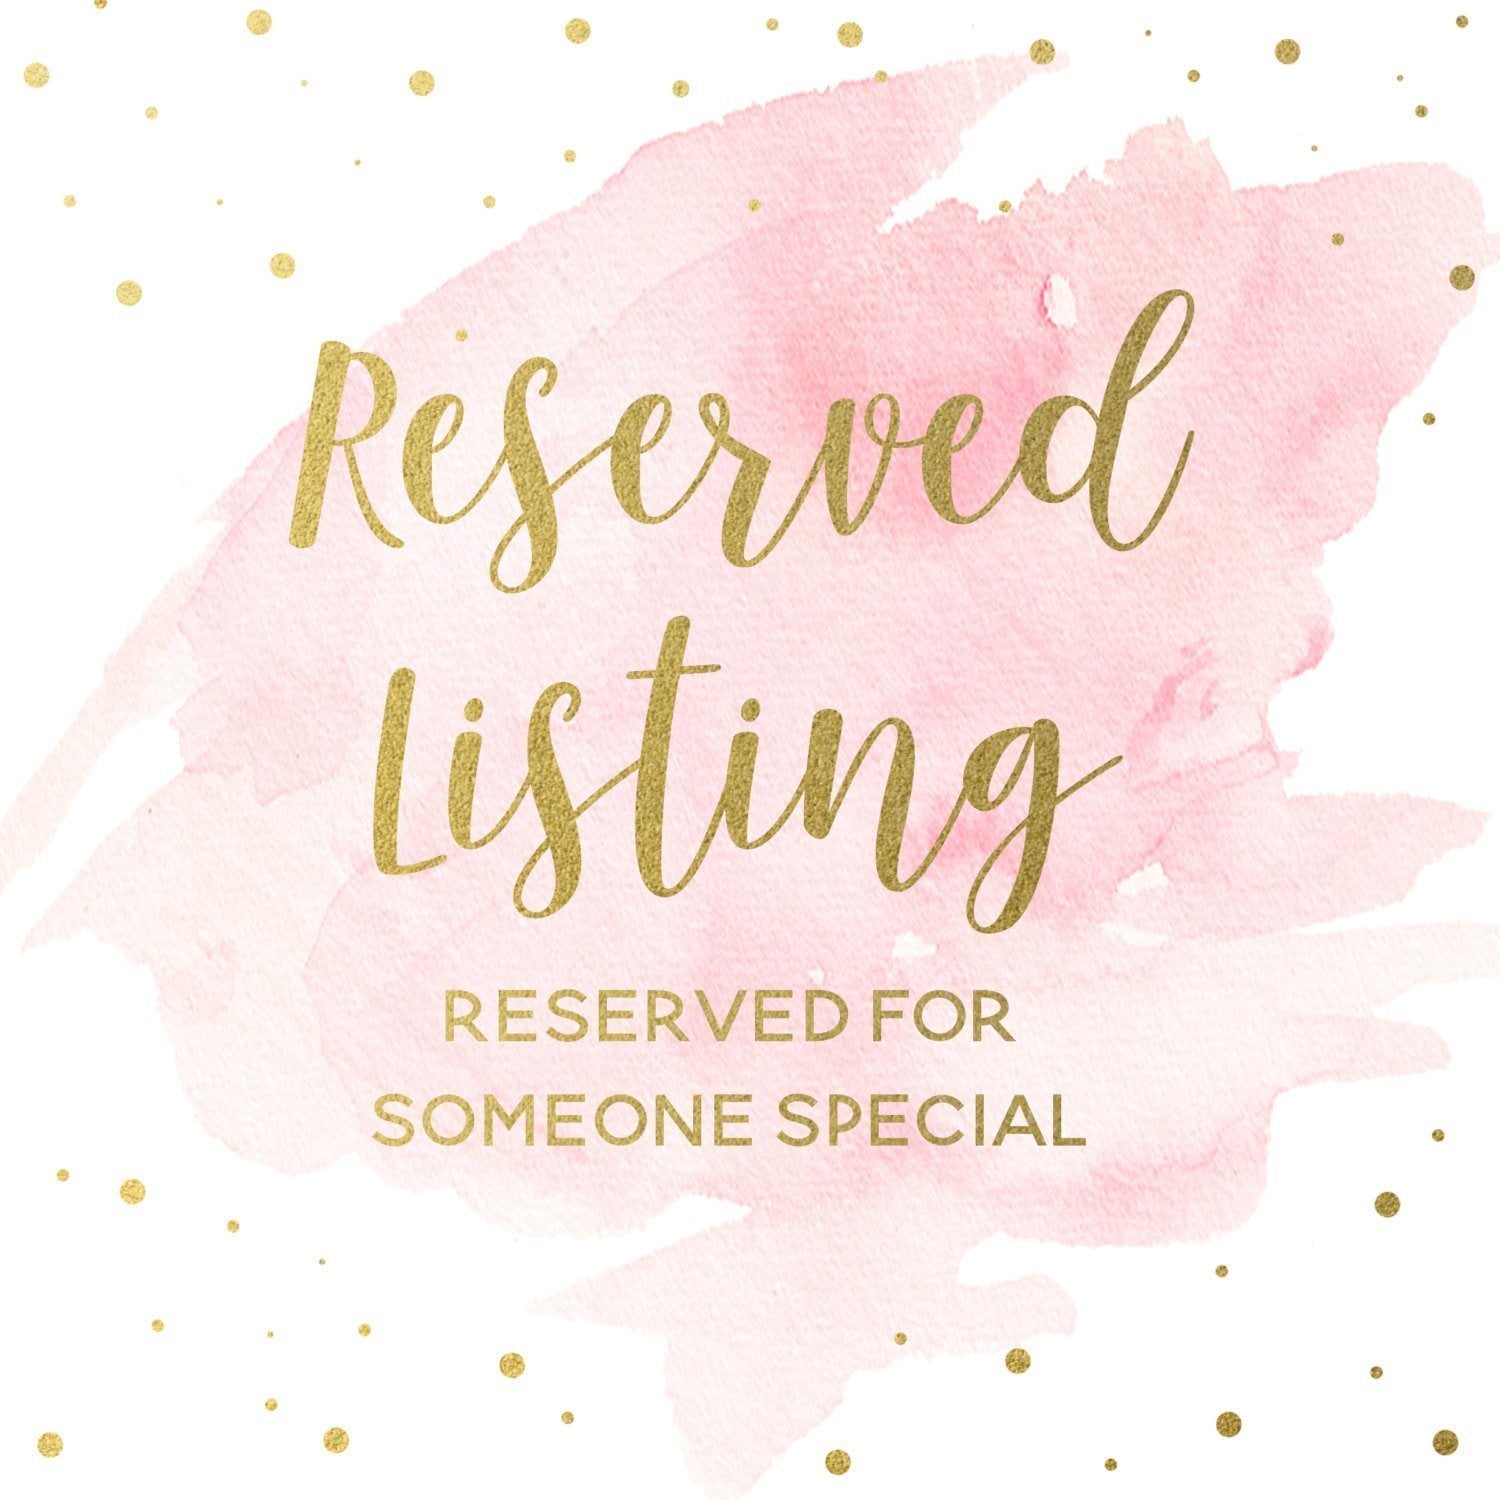 Reserved Listing - R McDonald